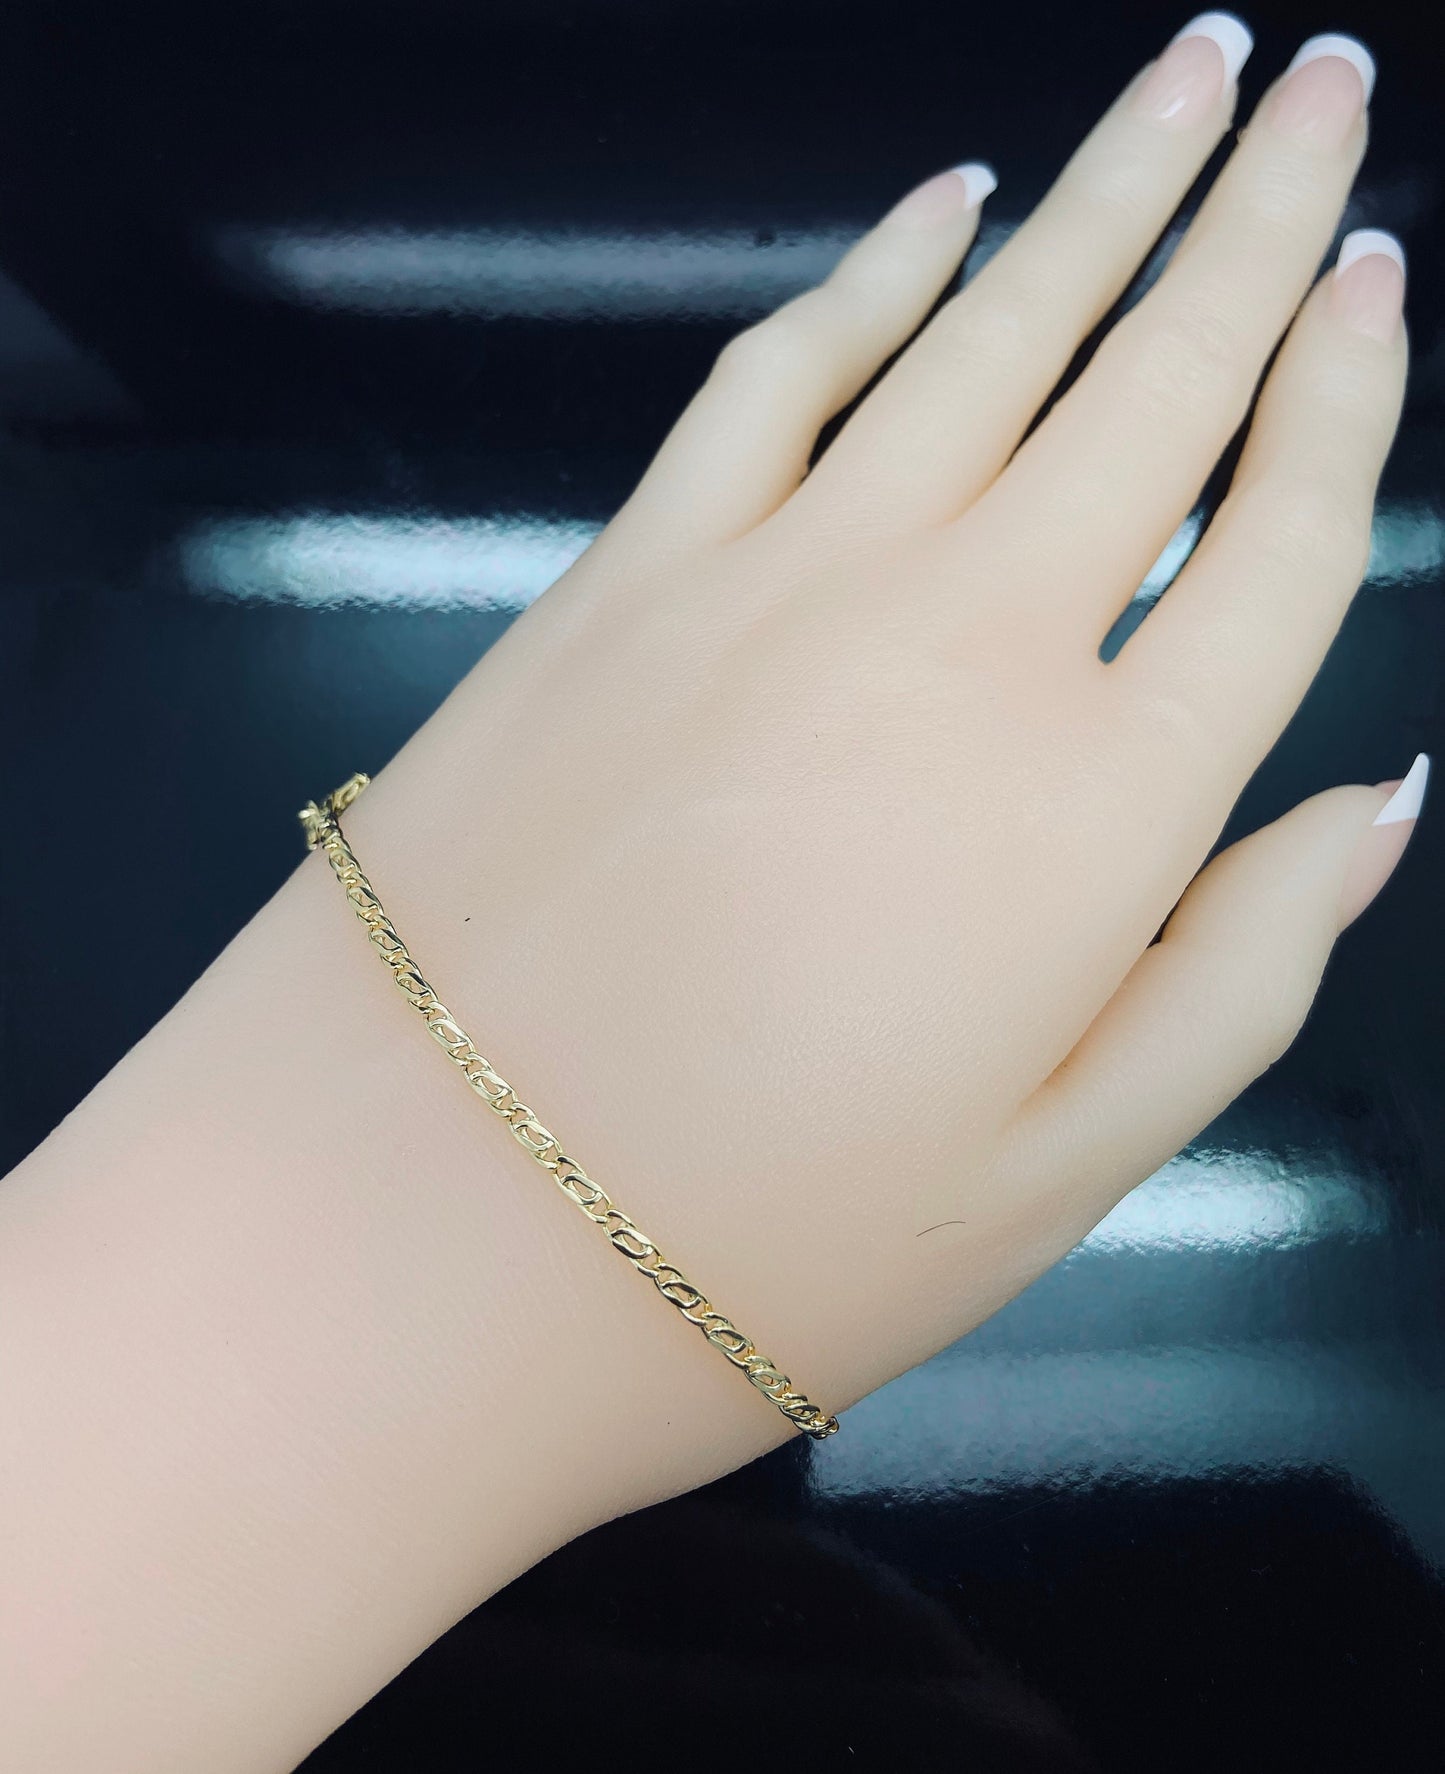 Yellow Gold High Polish Flat Anchor Link Chain Anklet Bracelet